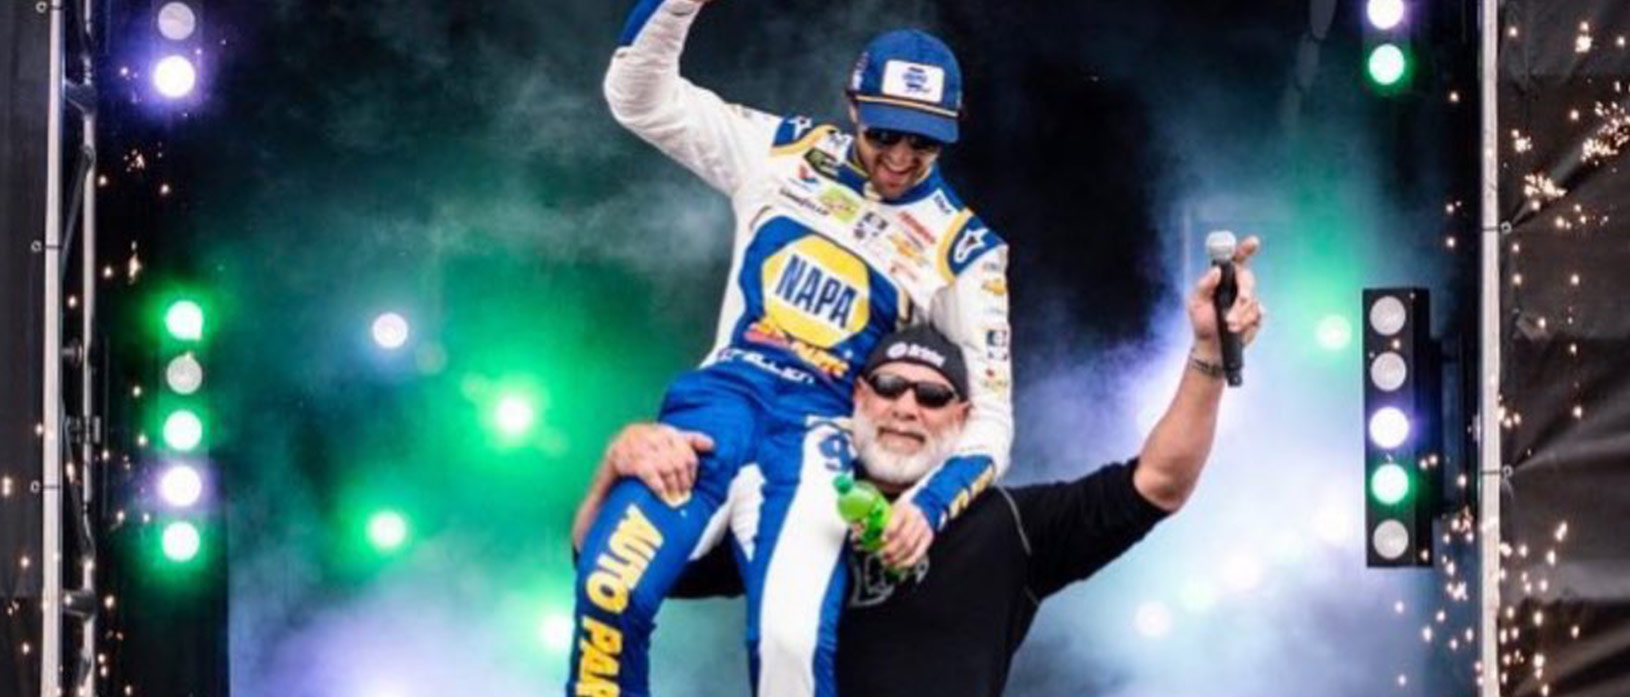 Goldberg holding up NASCAR driver with lights and fireworks in the background